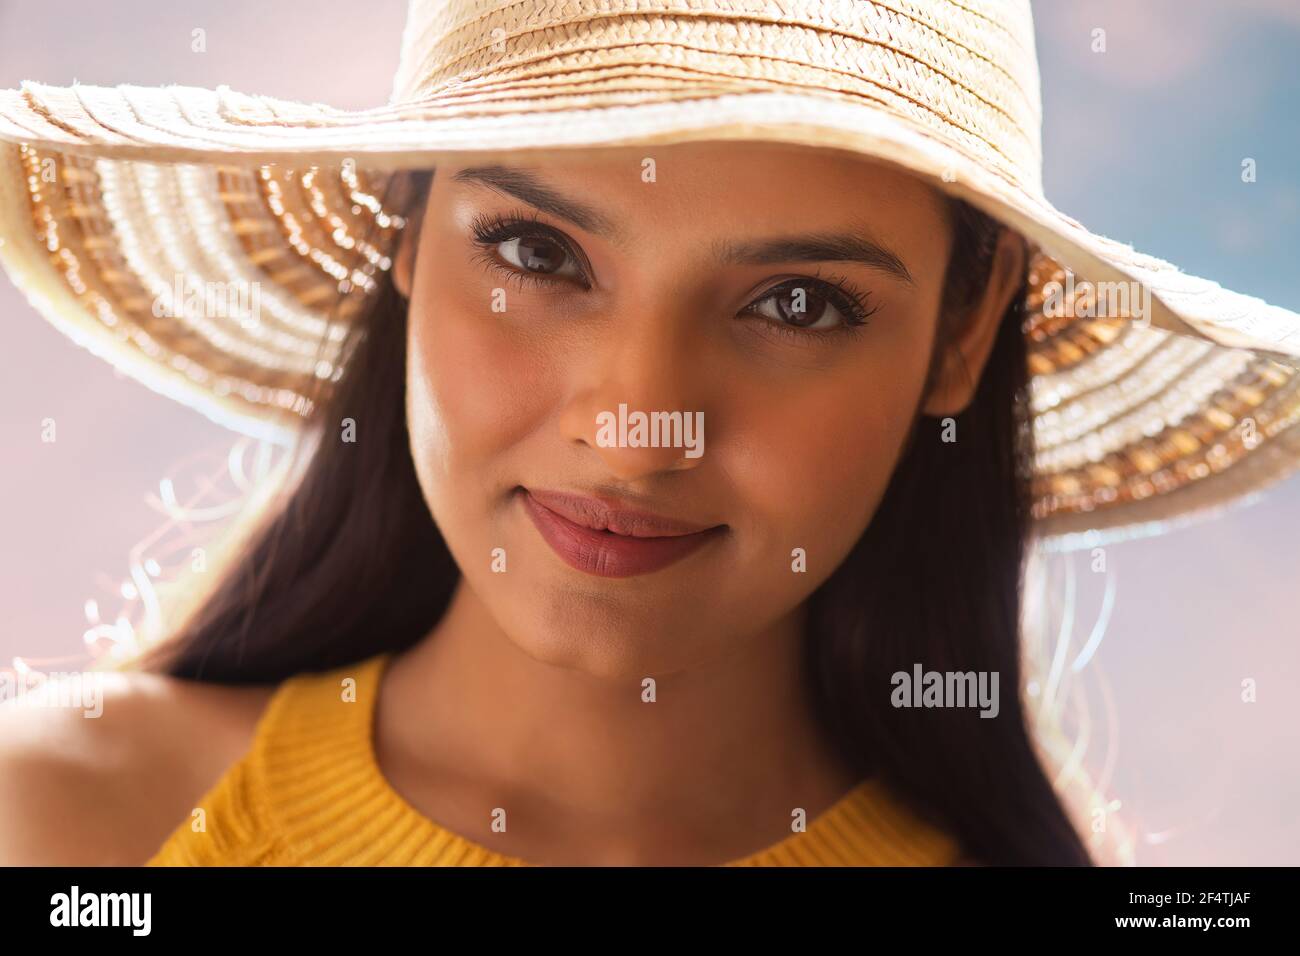 CLOSE SHOT OF A YOUNG WOMAN WEARING SUMMER HAT AND LOOKING AT CAMERA Stock Photo